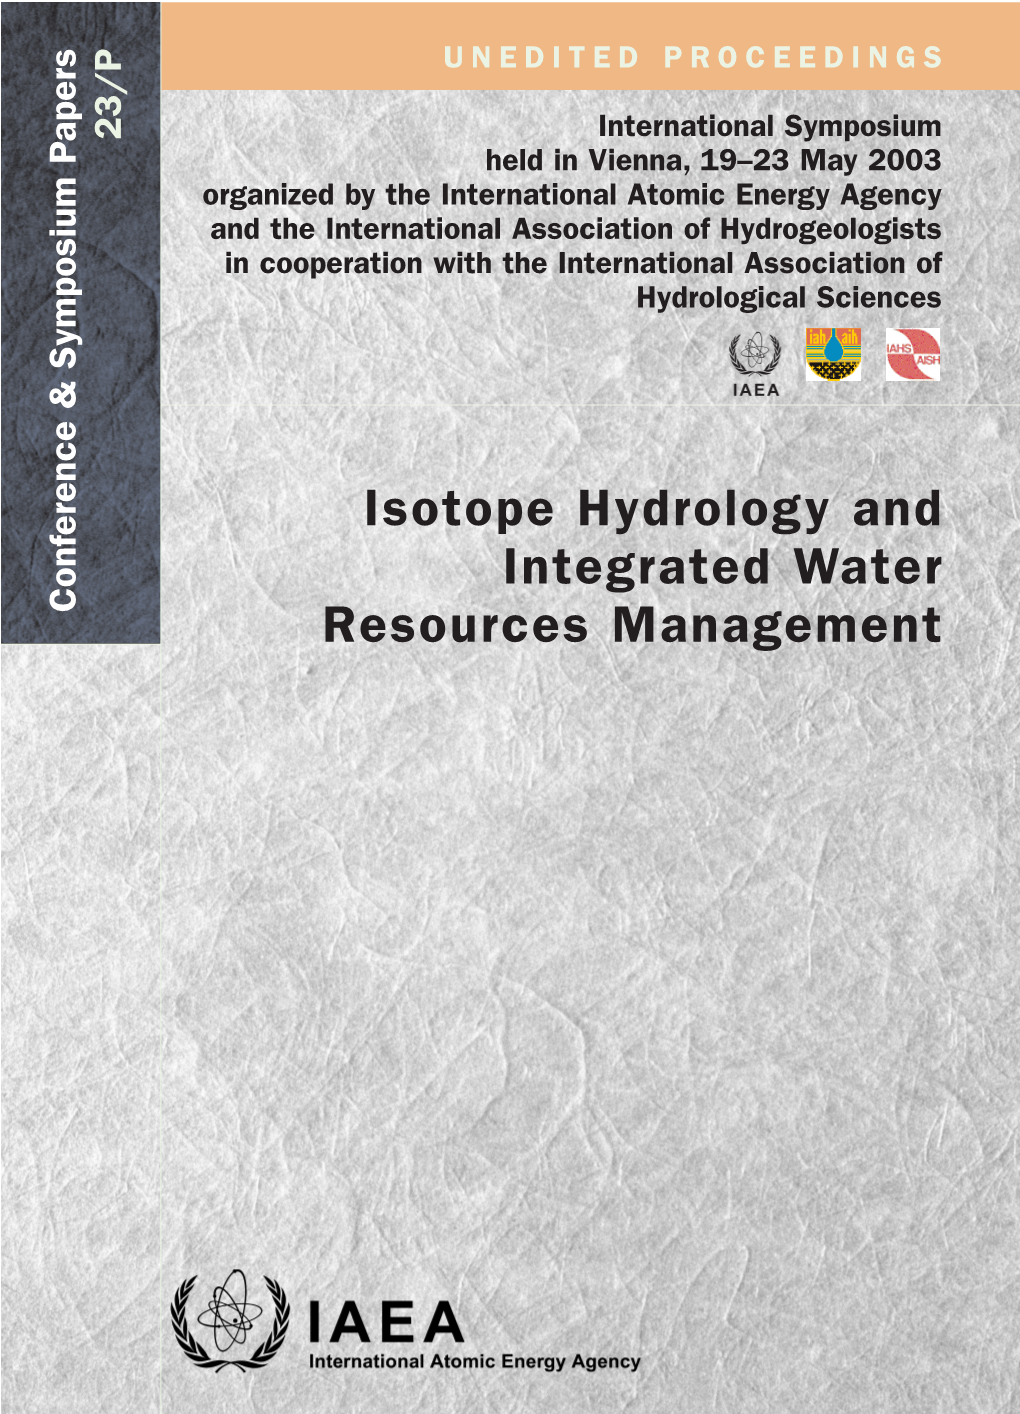 Isotope Hydrology and Integrated Water Resources Management the Originating Section of This Publication in the IAEA Was